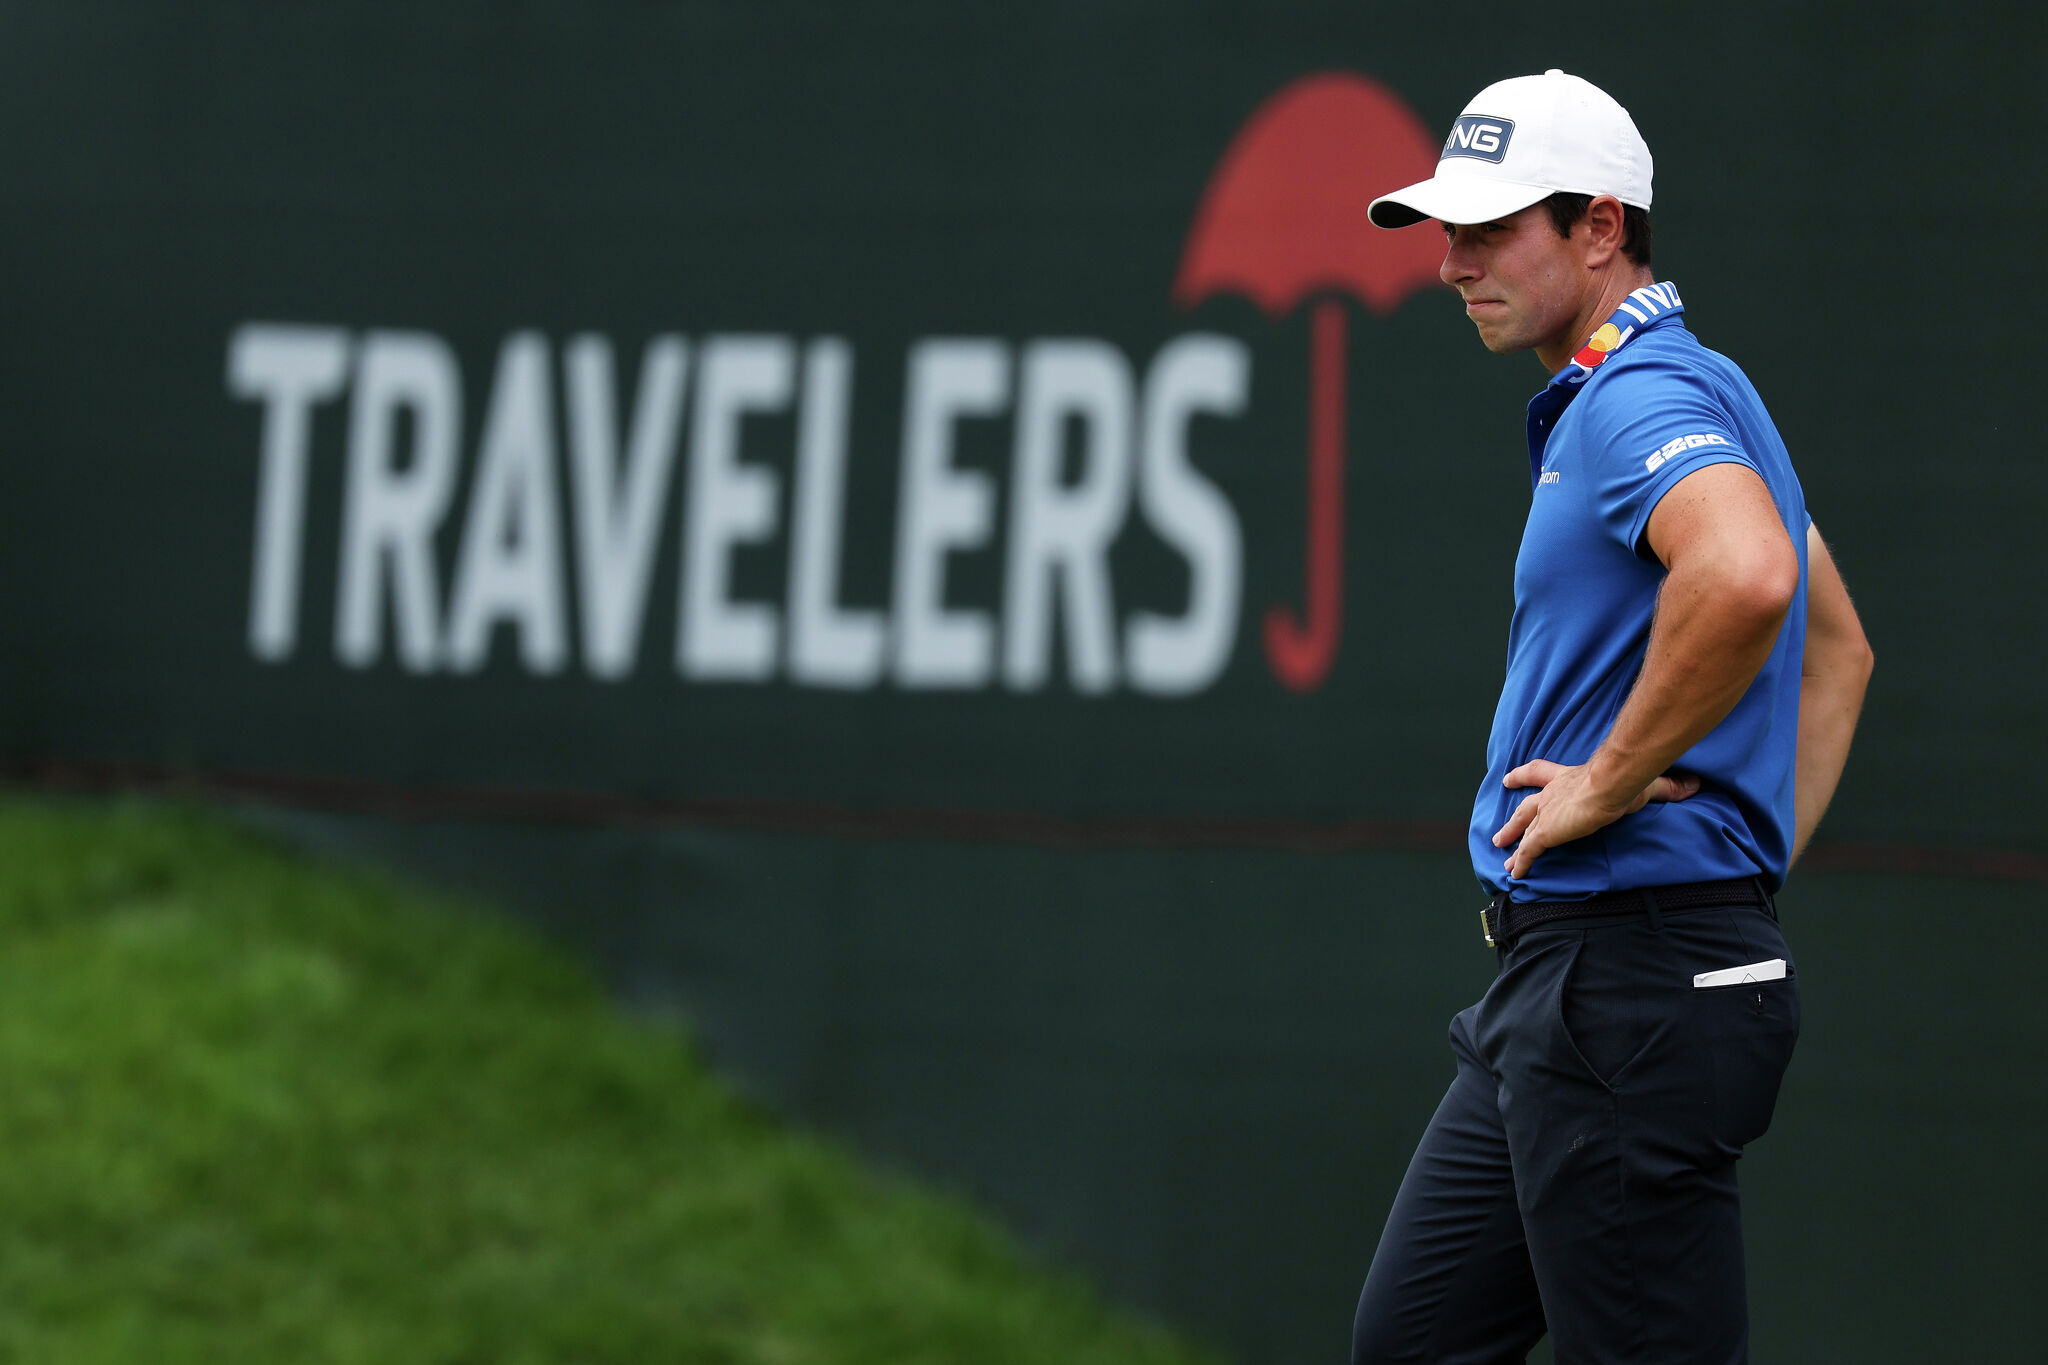 Since Travelers Championship sponsors exemption, Viktor Hovland has blossomed into PGA Tour star picture picture